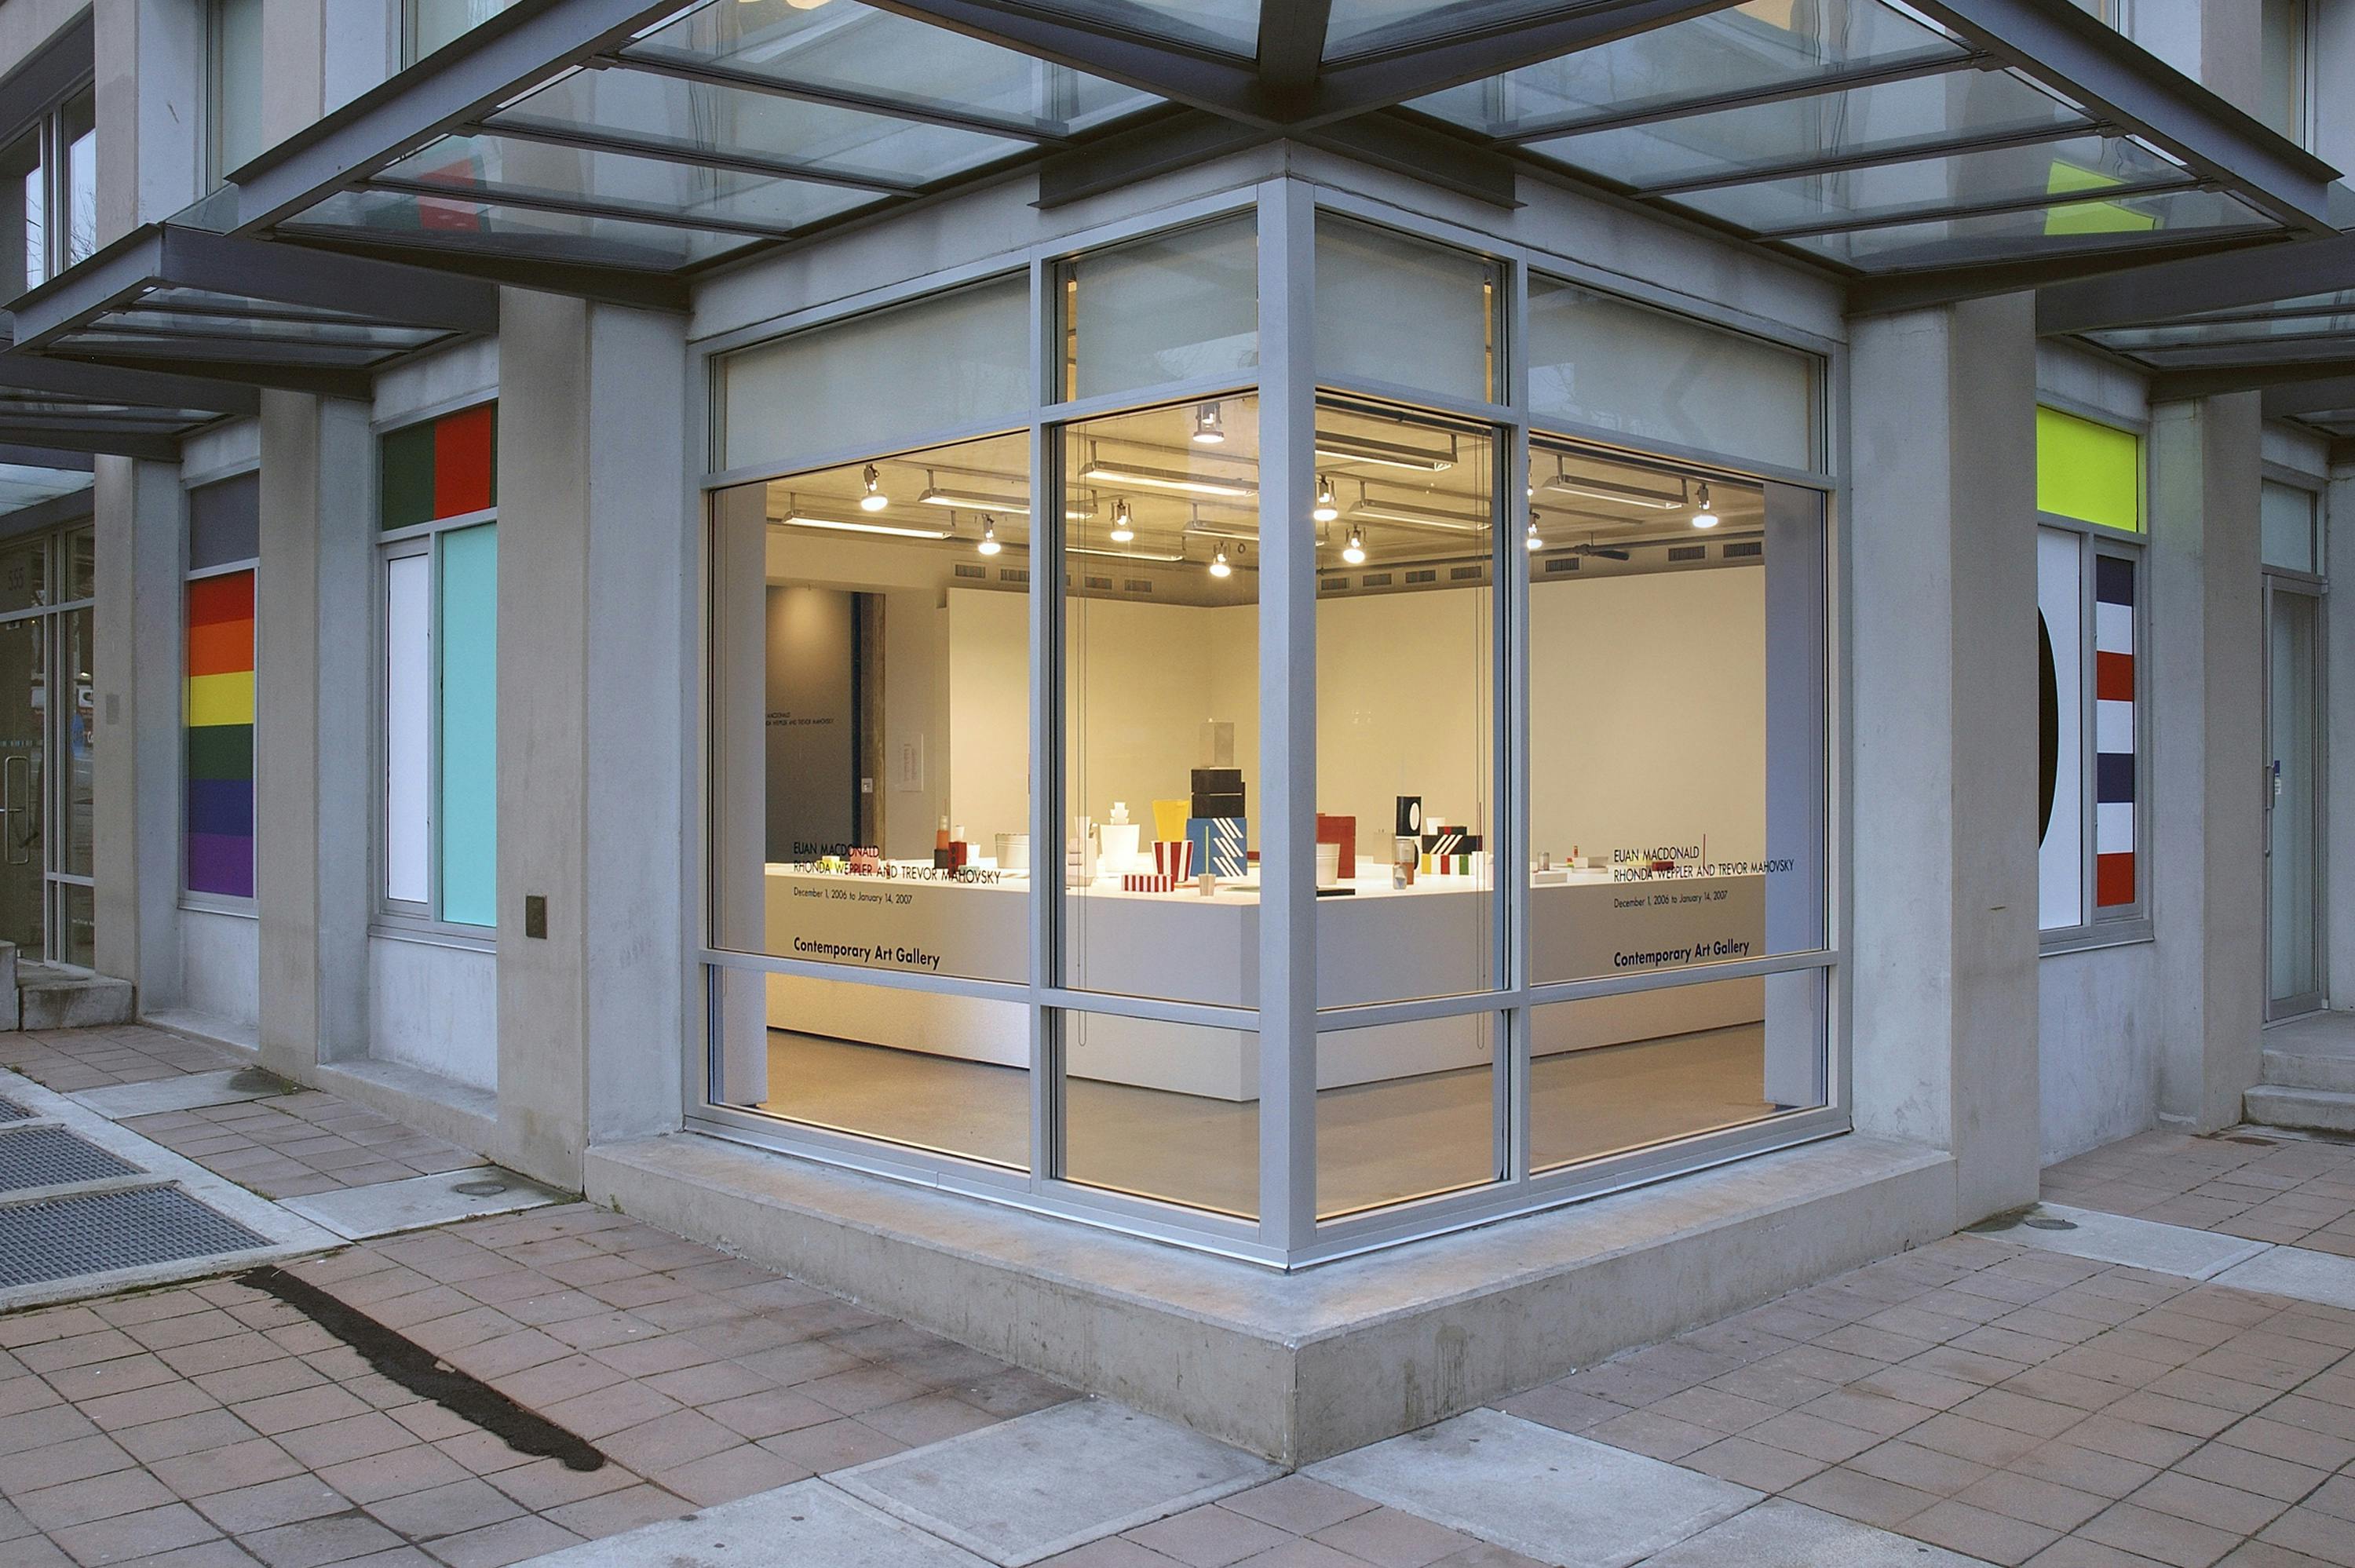 An image taken outside CAG looking into the inside gallery space through glass windows at the corner of Nelson and Richard Streets. Various sized sculptures are placed in a gallery on a large pedestal.